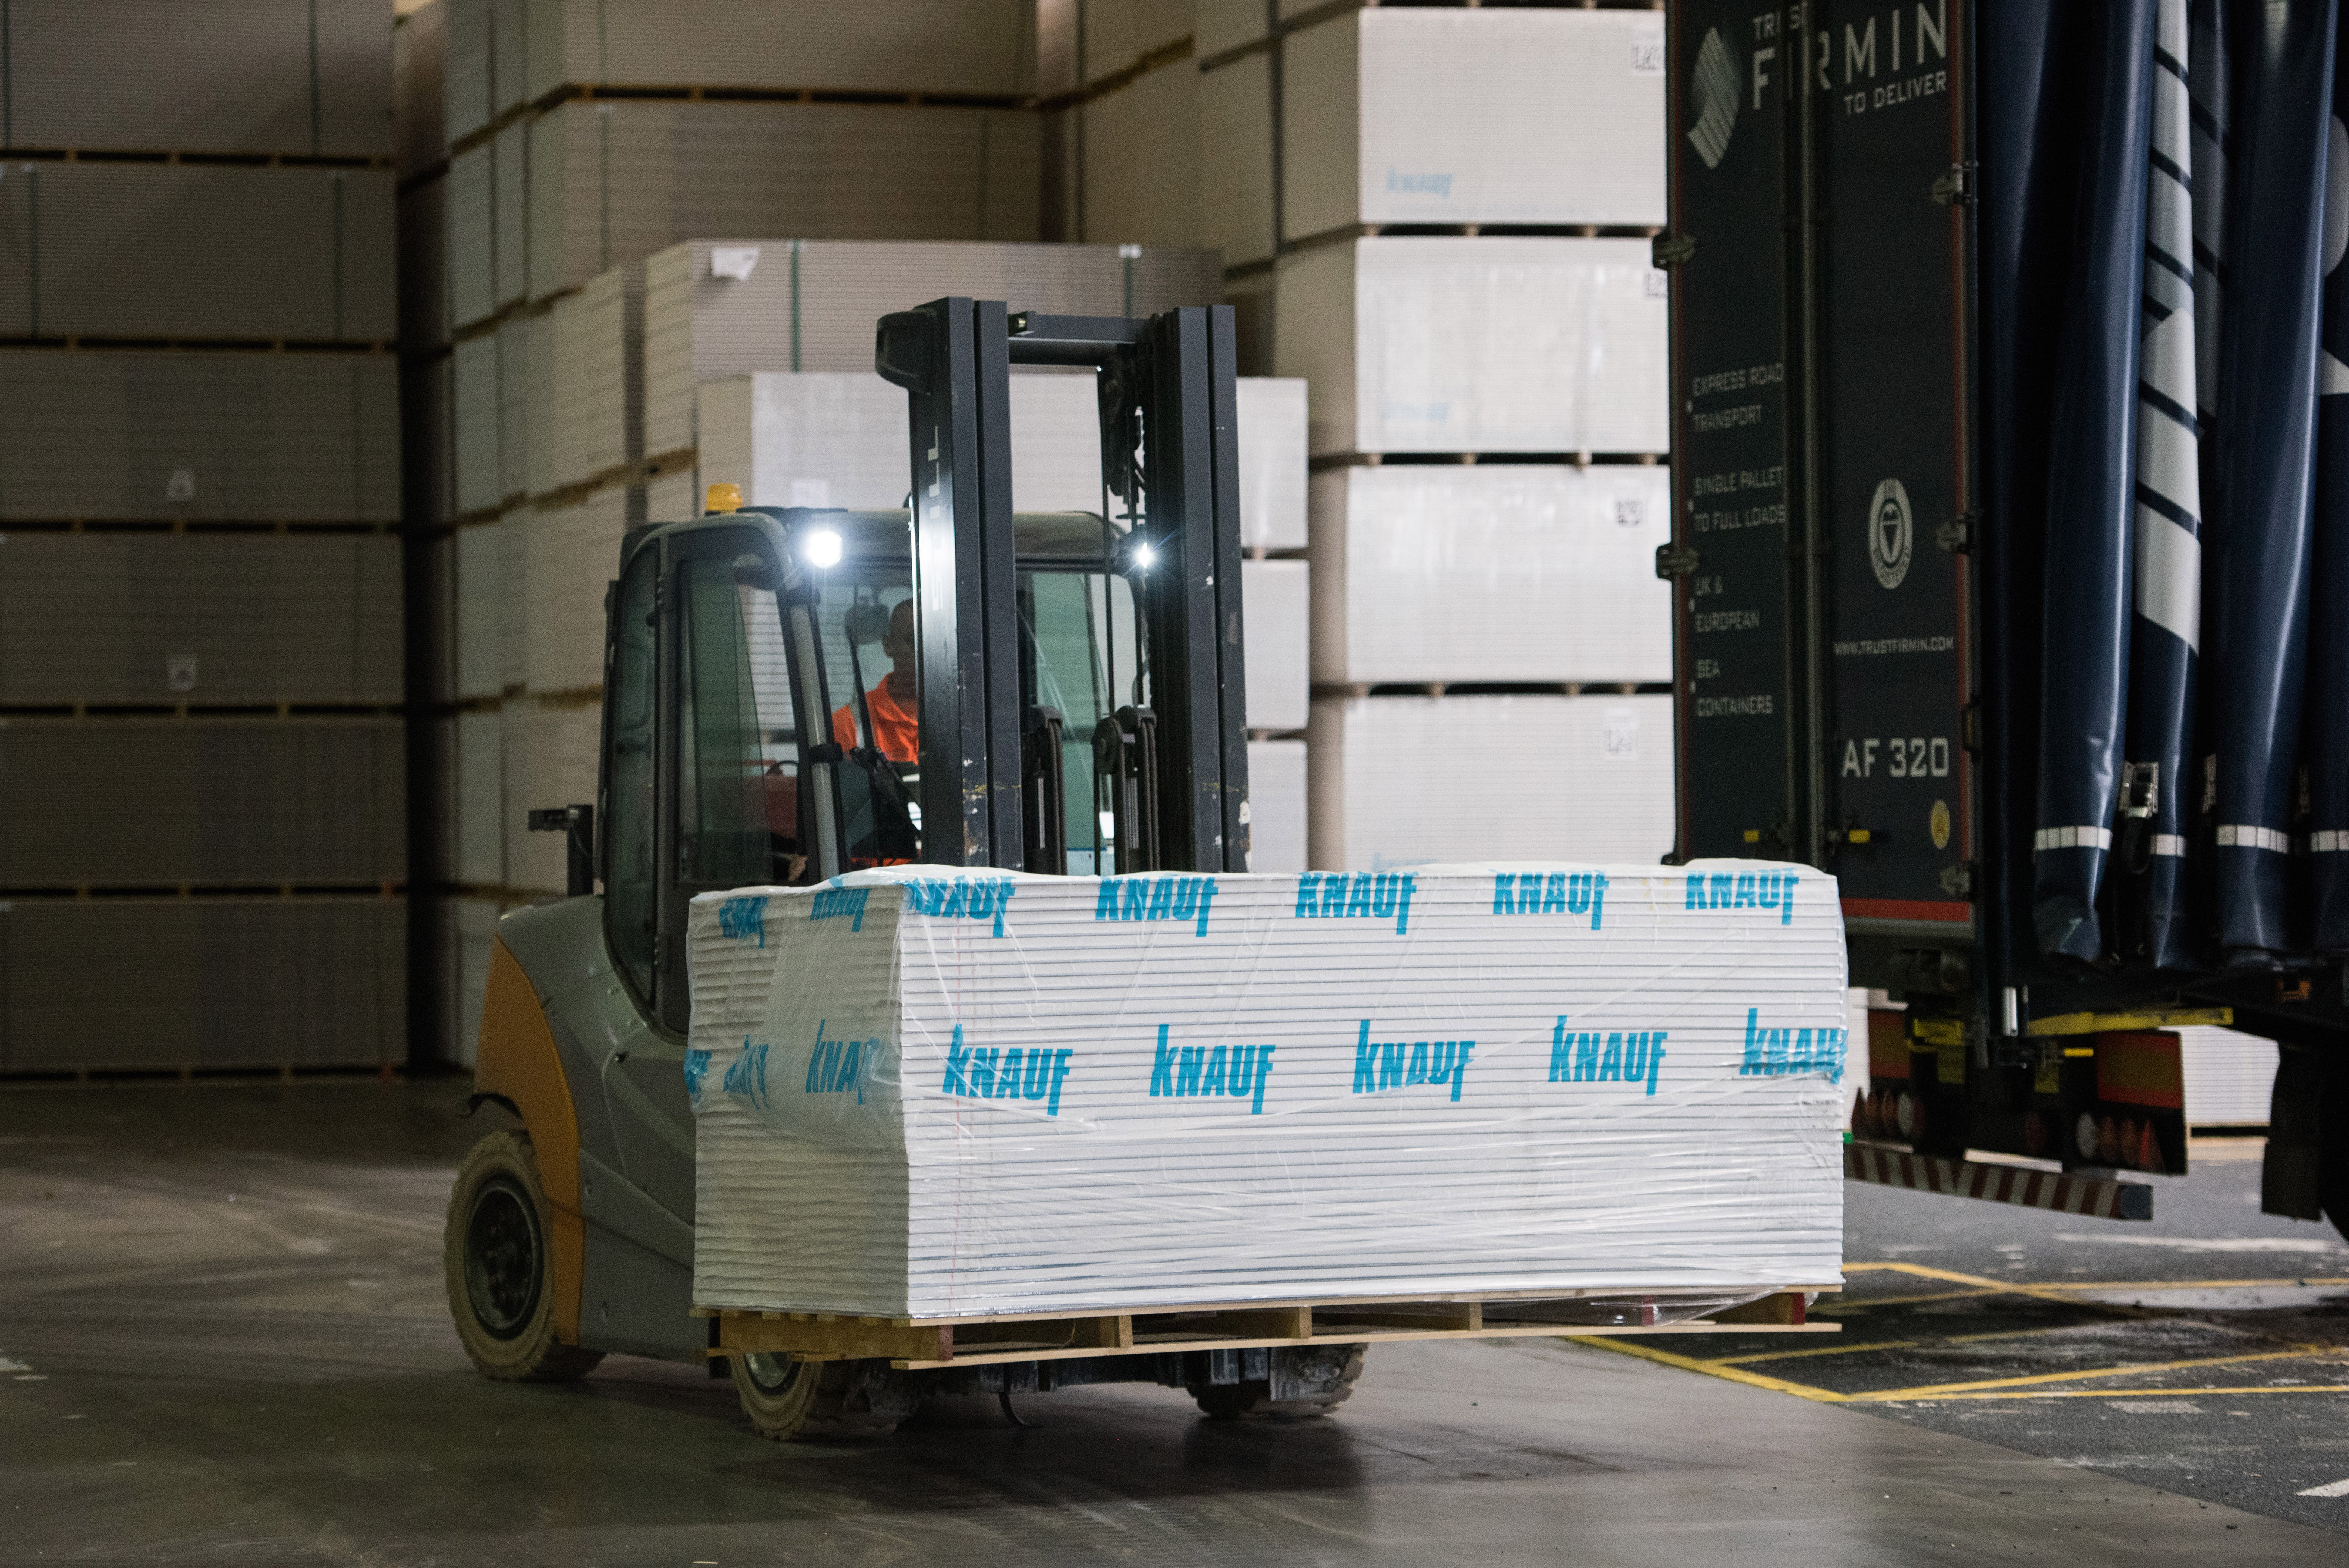 Forklift carrying Knauf boxes